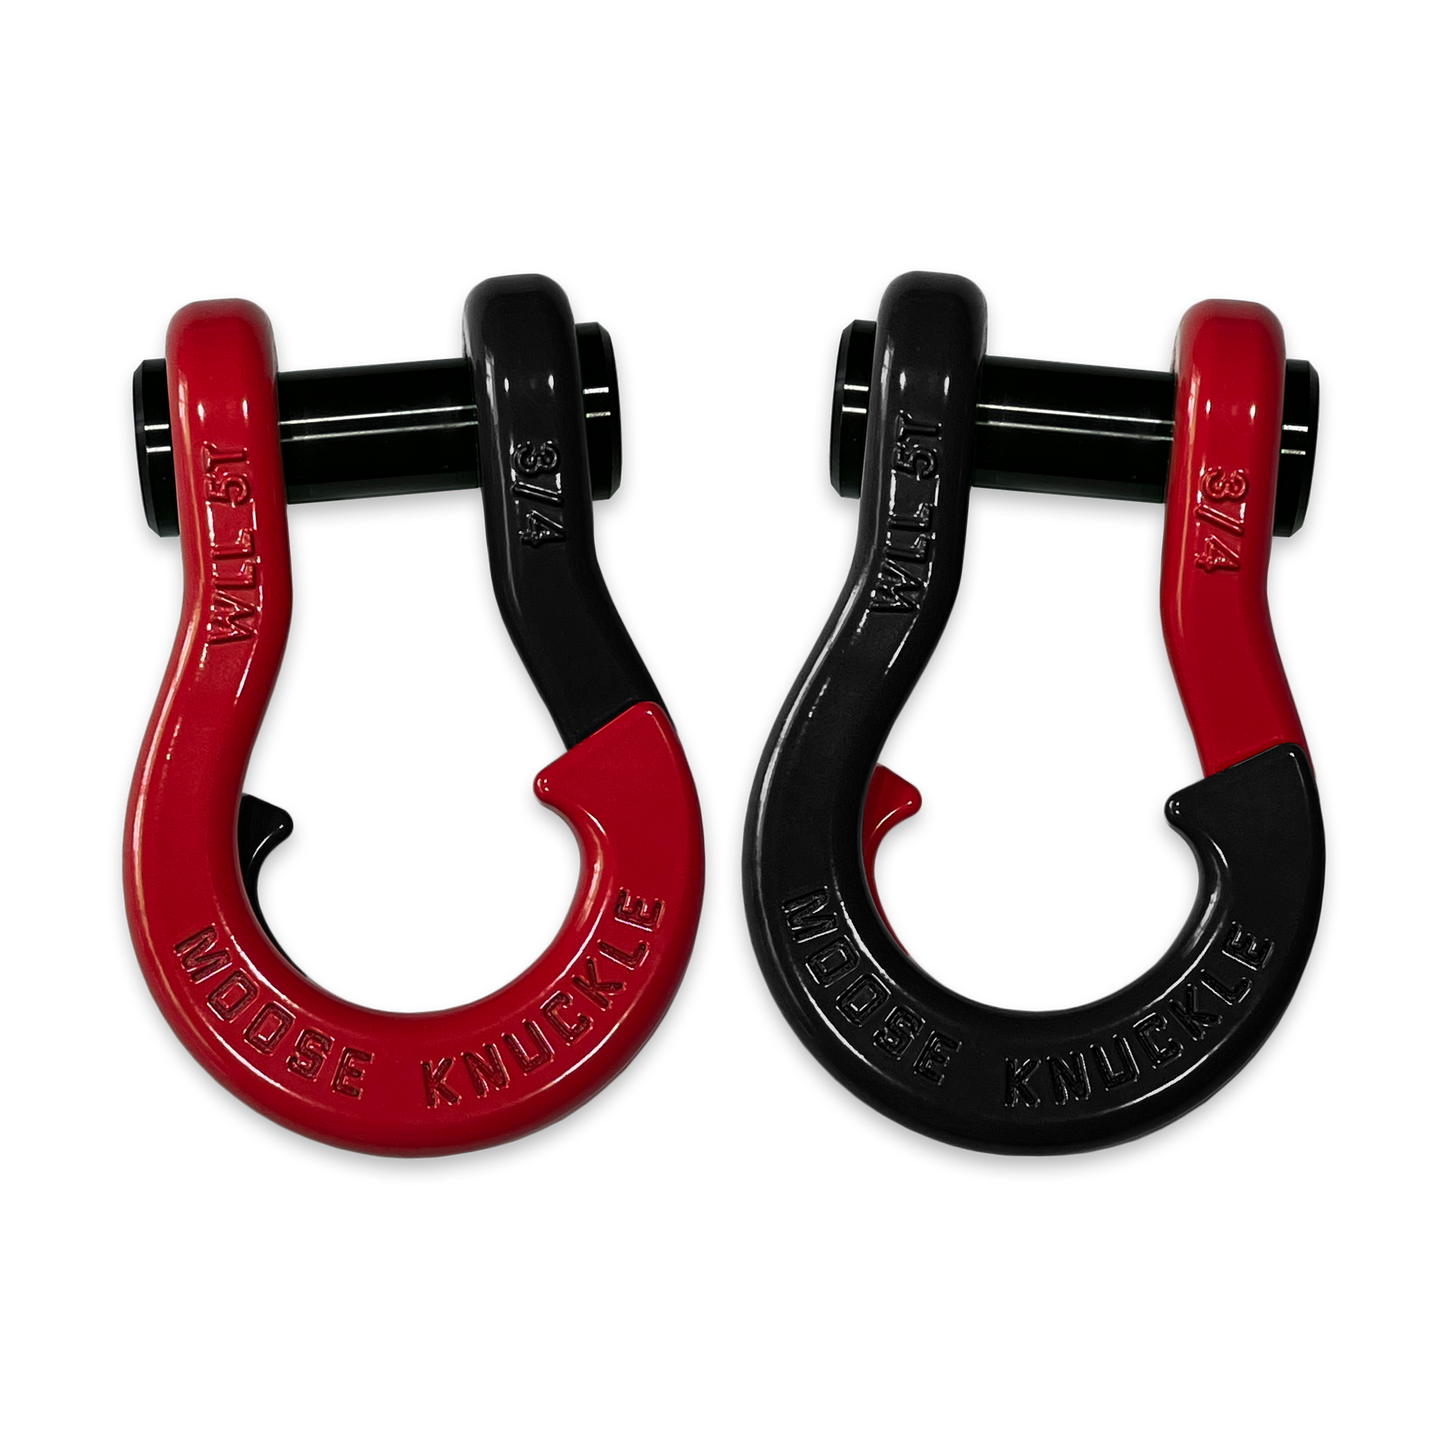 Moose Knuckle's Jowl Recovery Split Shackle 3/4 in Flame Red and Black Hole Combo